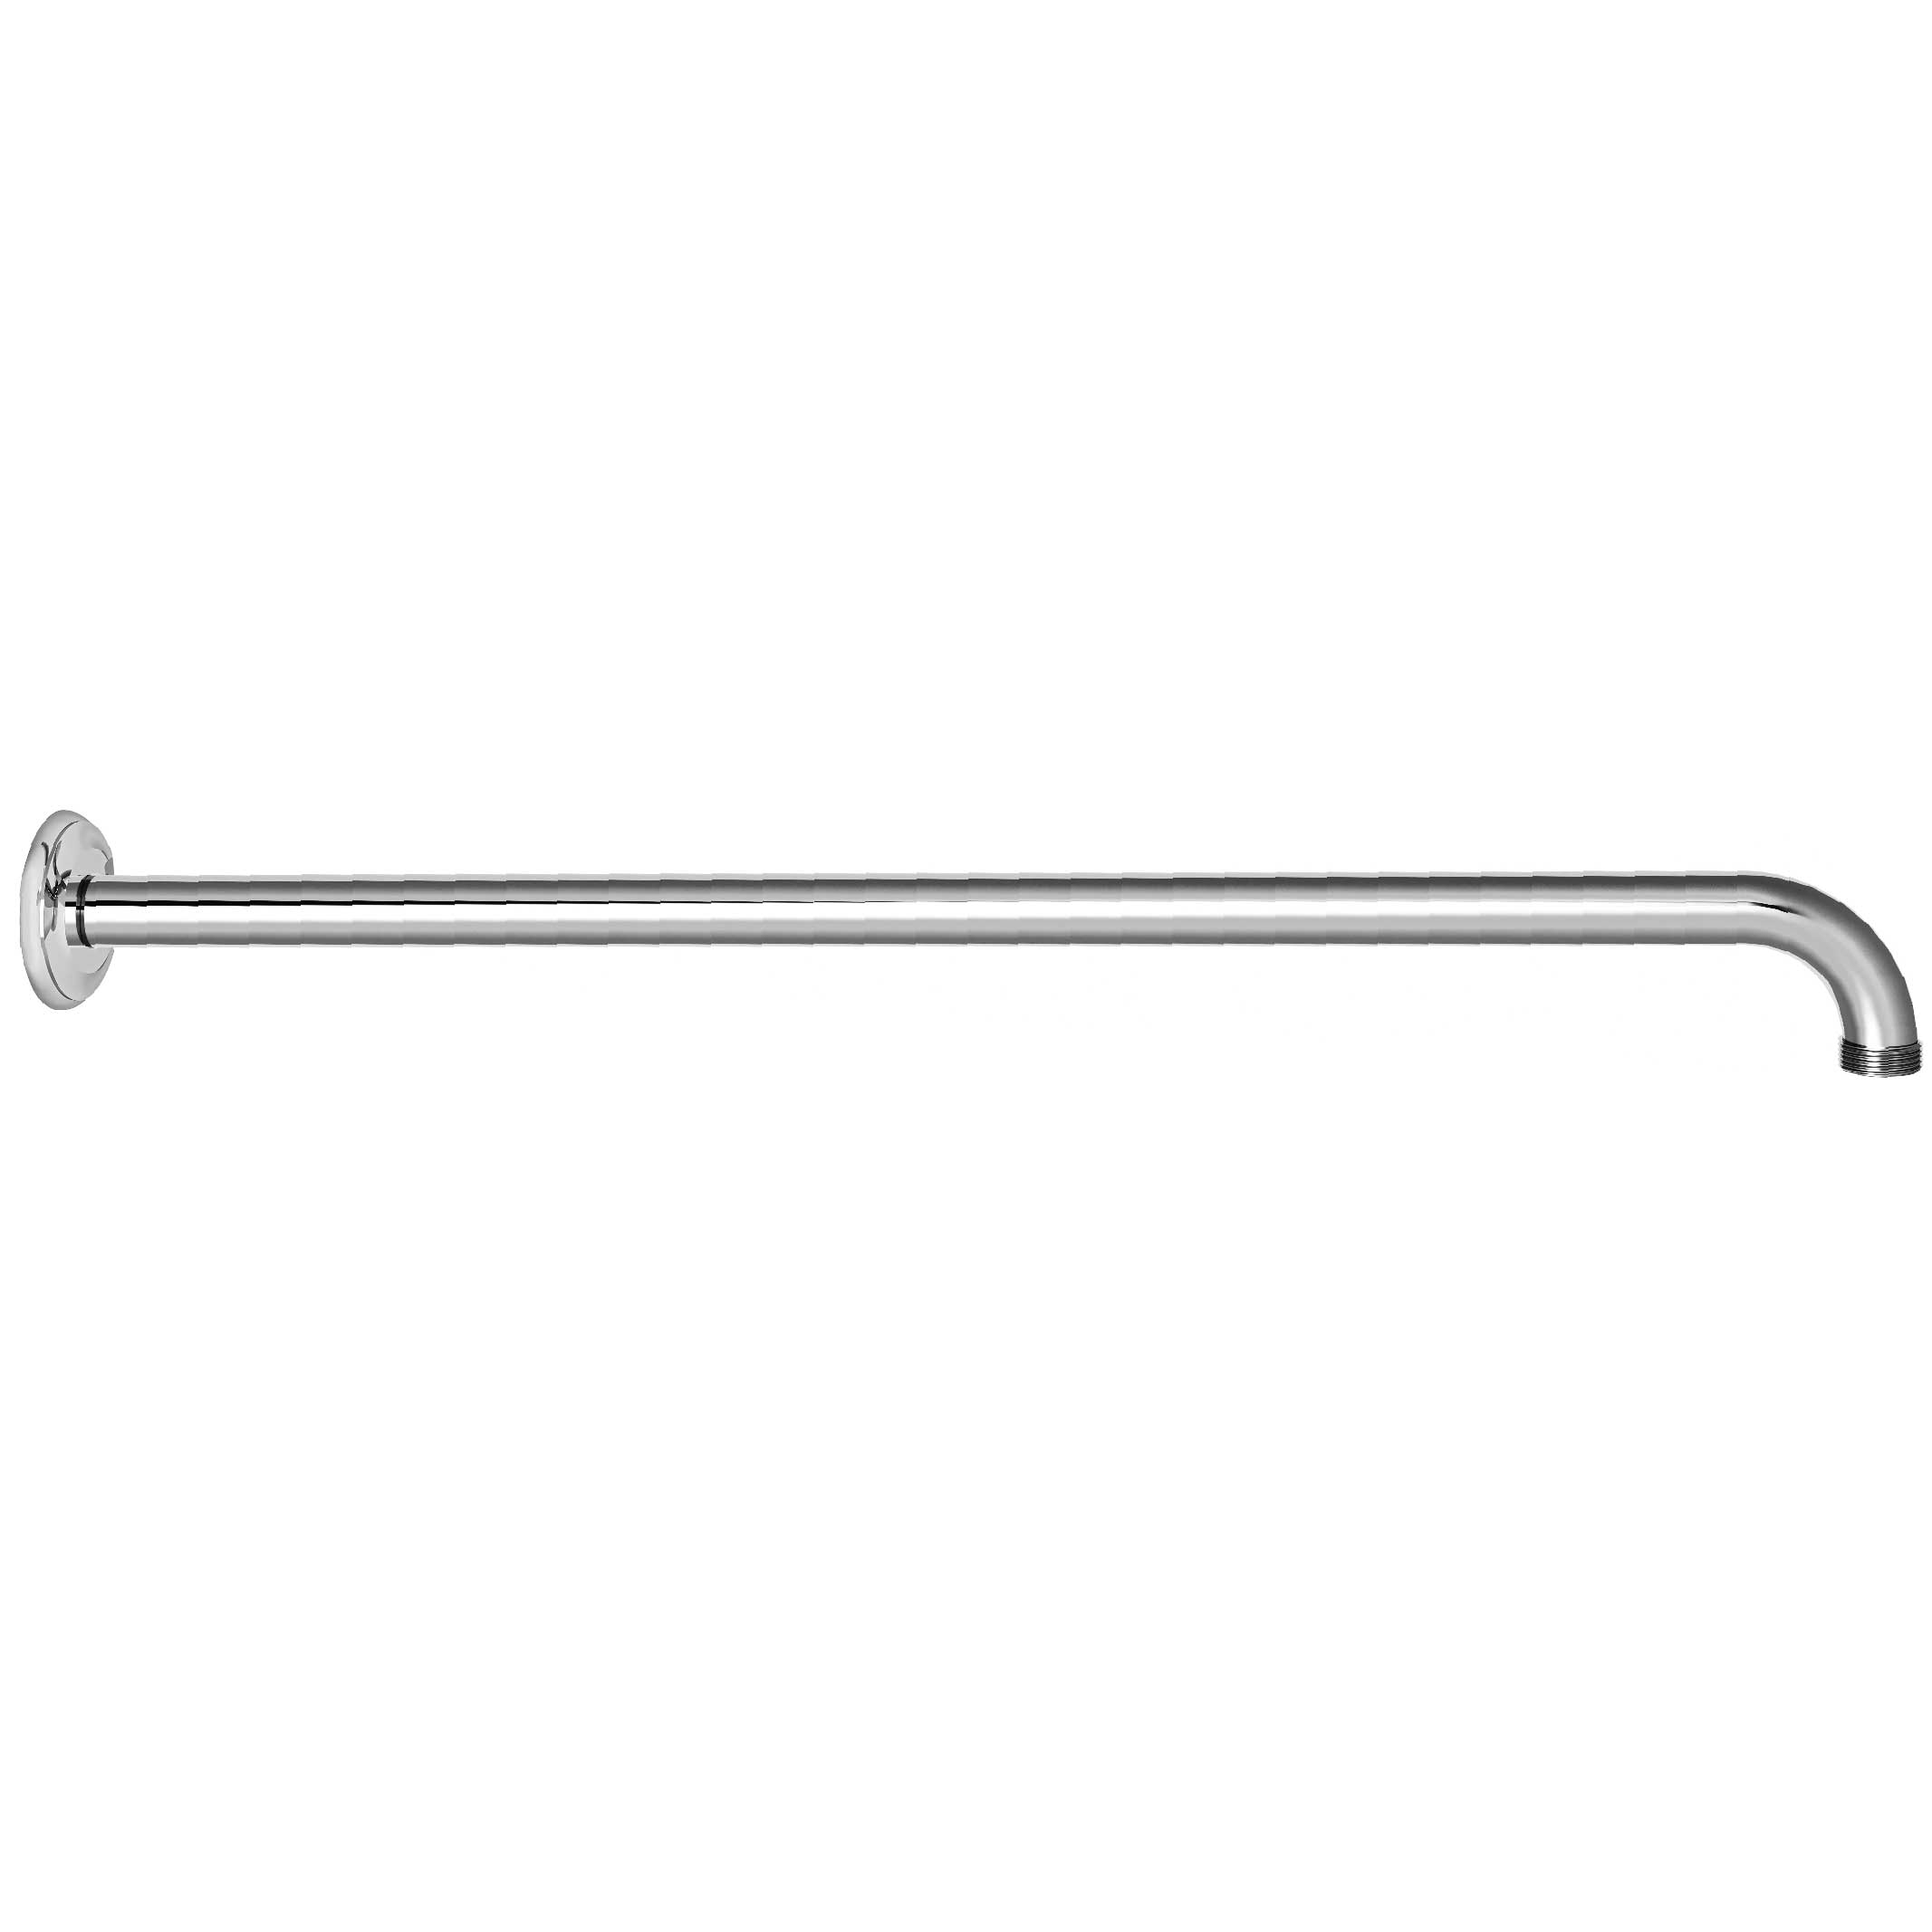 M40-2W450 Wall mounted shower arm 450mm